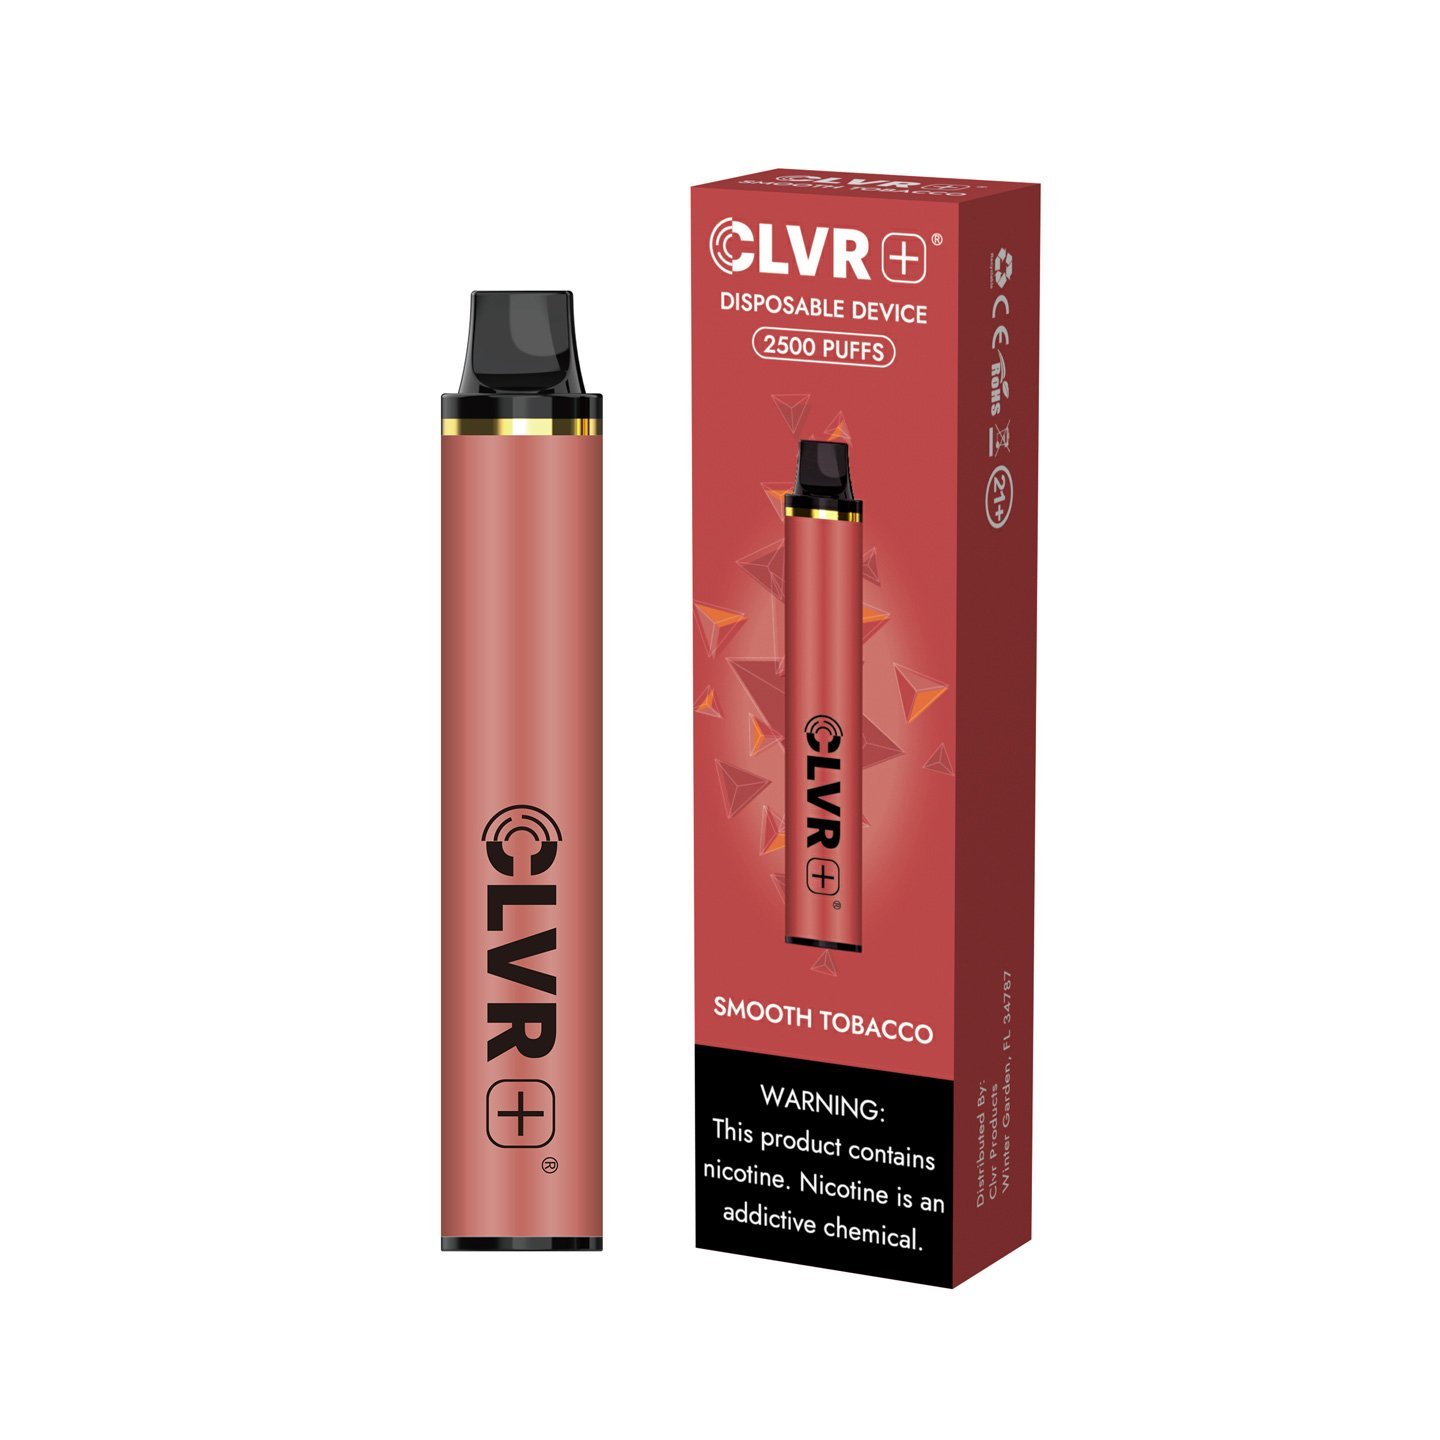 CLVRPlus Disposable Device (Smooth Tobacco- 2500 Puffs)